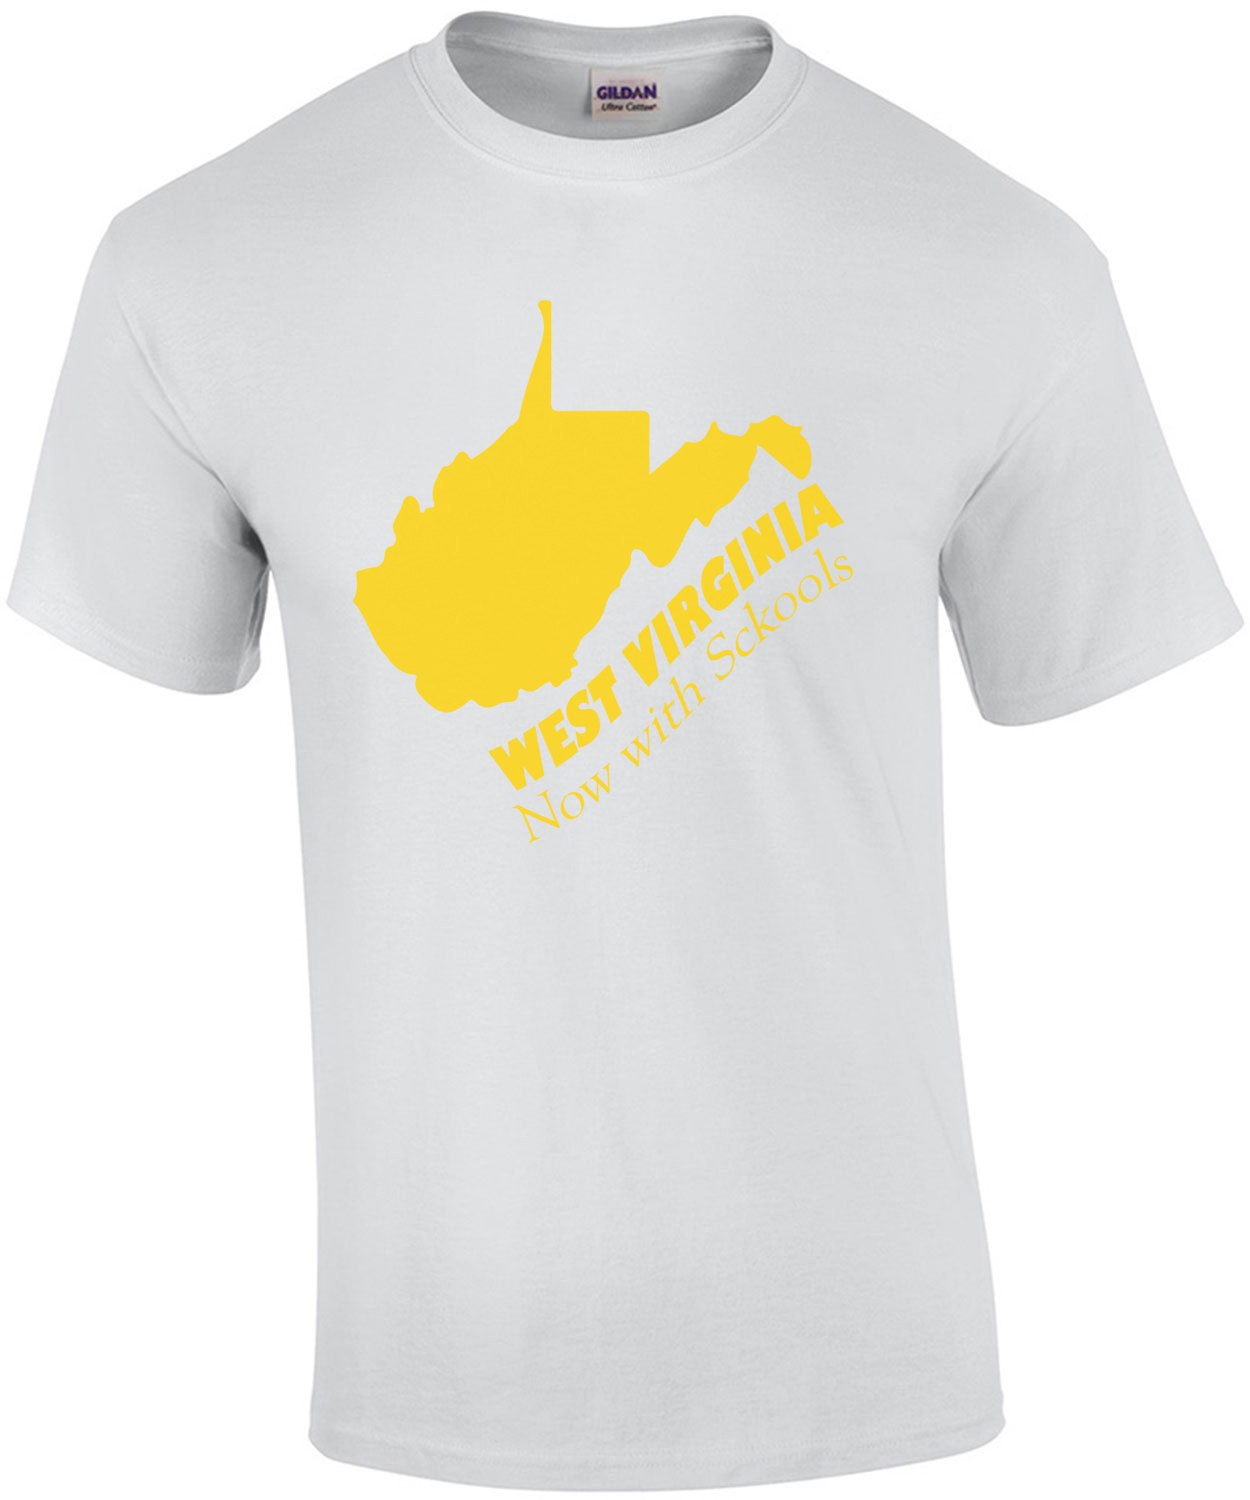 West Virginia - Now with sckools - West Virginia T-Shirt